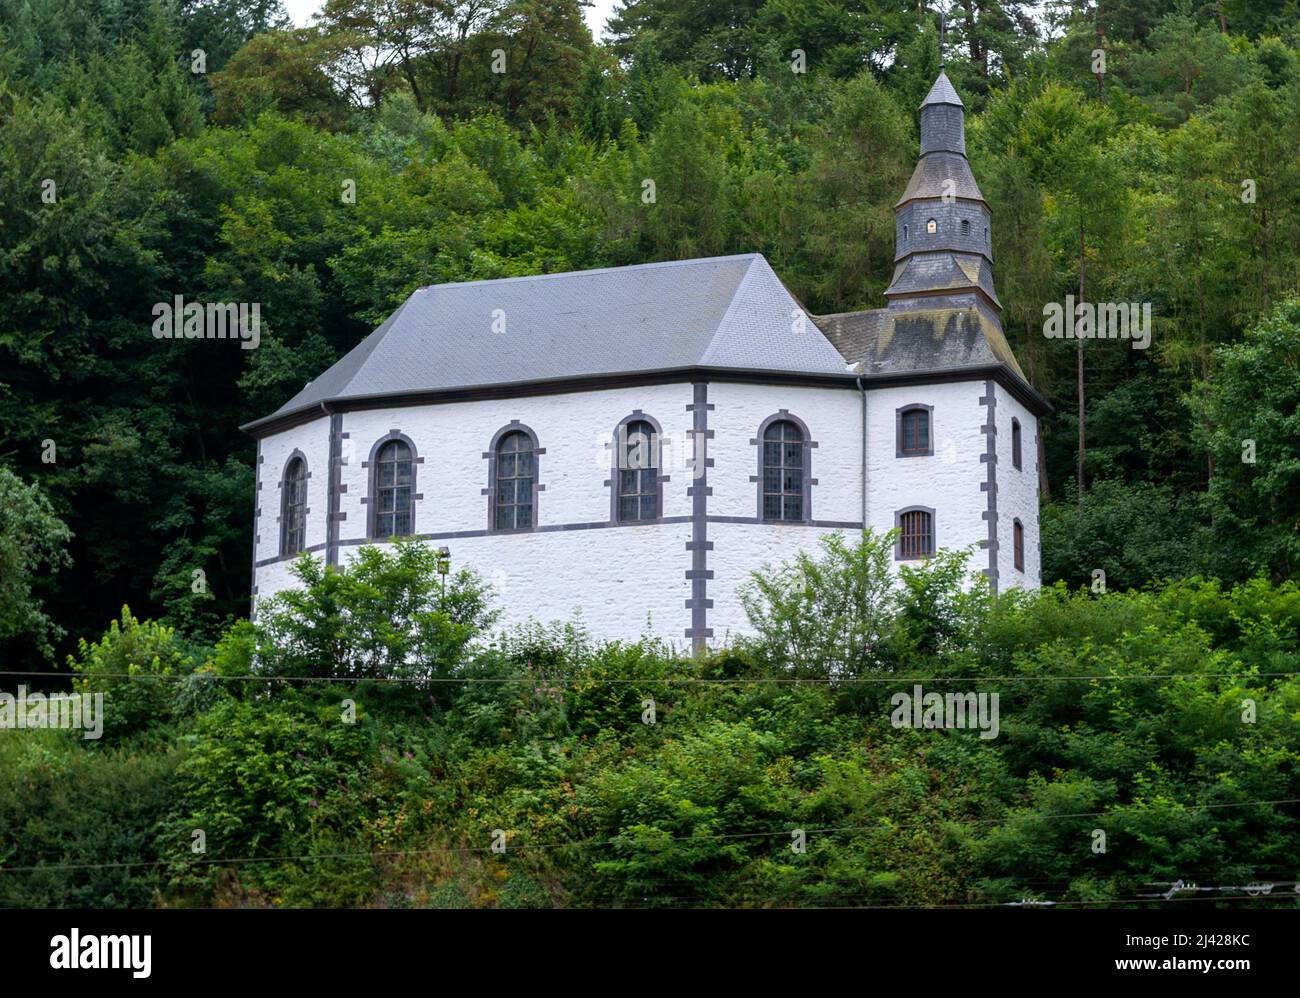 The Loretto Chapel, Clervaux, Luxembourg. Stock Photo